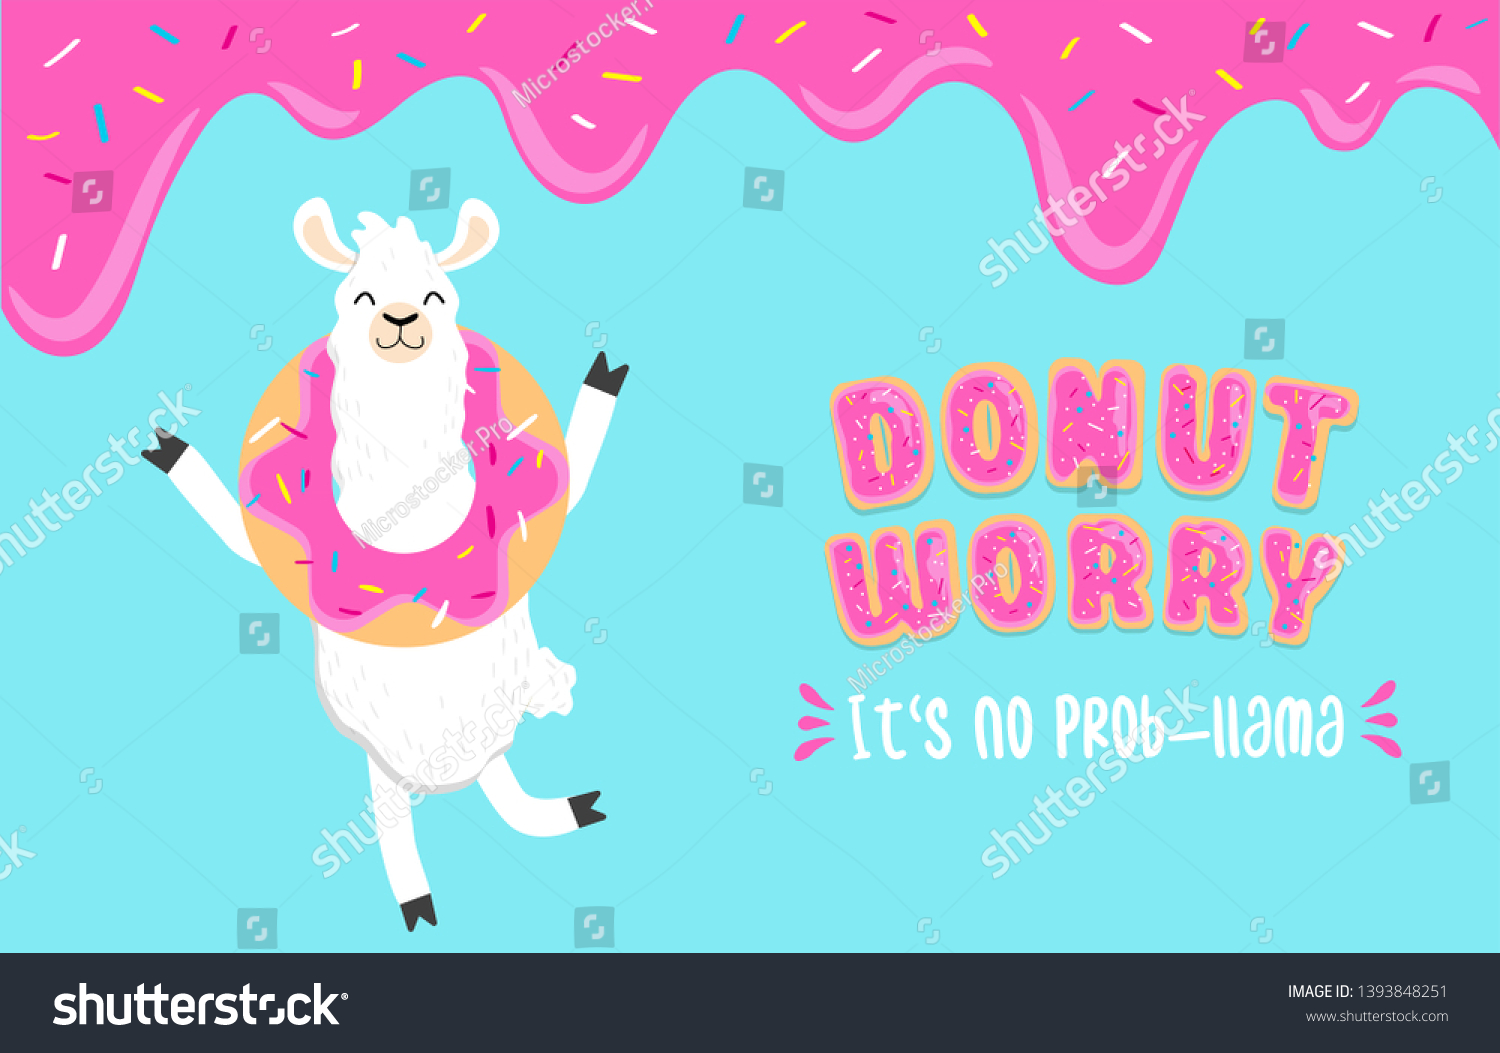 Donut Worry No Probllama Inspirational Card Stock Vector Royalty Free 1393848251 Shutterstock 3433